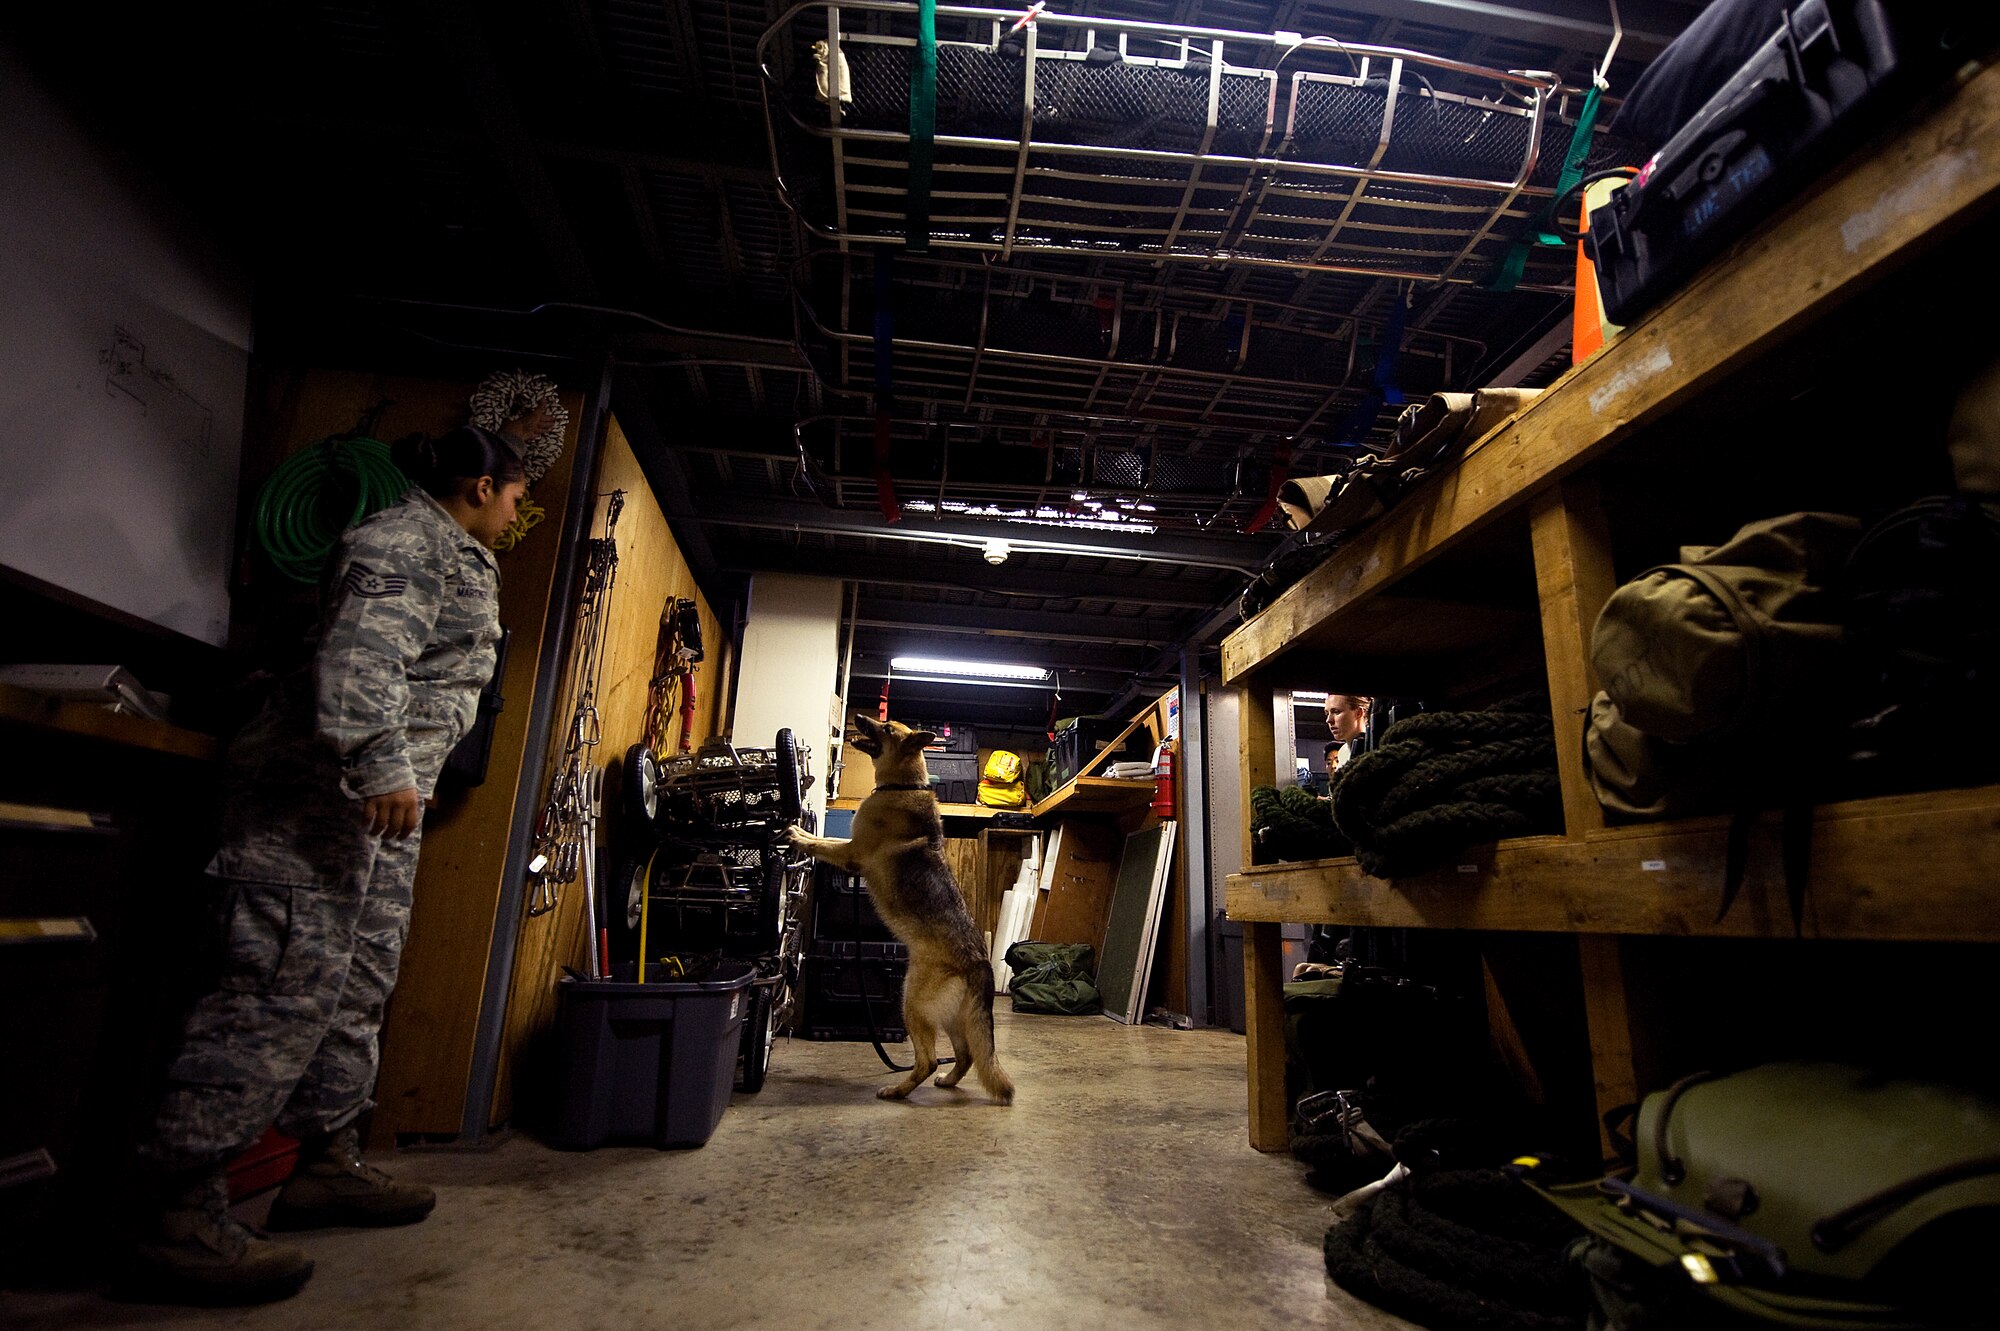 U.S. Air Force Military Working Dog Zina and her handler, Staff Sgt. April Martinez, perform a training search of a building on Kadena Air Base, Japan, May 16, 2013. Zina, along with three other MWDs who retired from the Air Force June 13, conducted nearly 60,000 detector sweeps collectively throughout their careers. (U.S. Air Force photo by Senior Airman Maeson L. Elleman/Released)